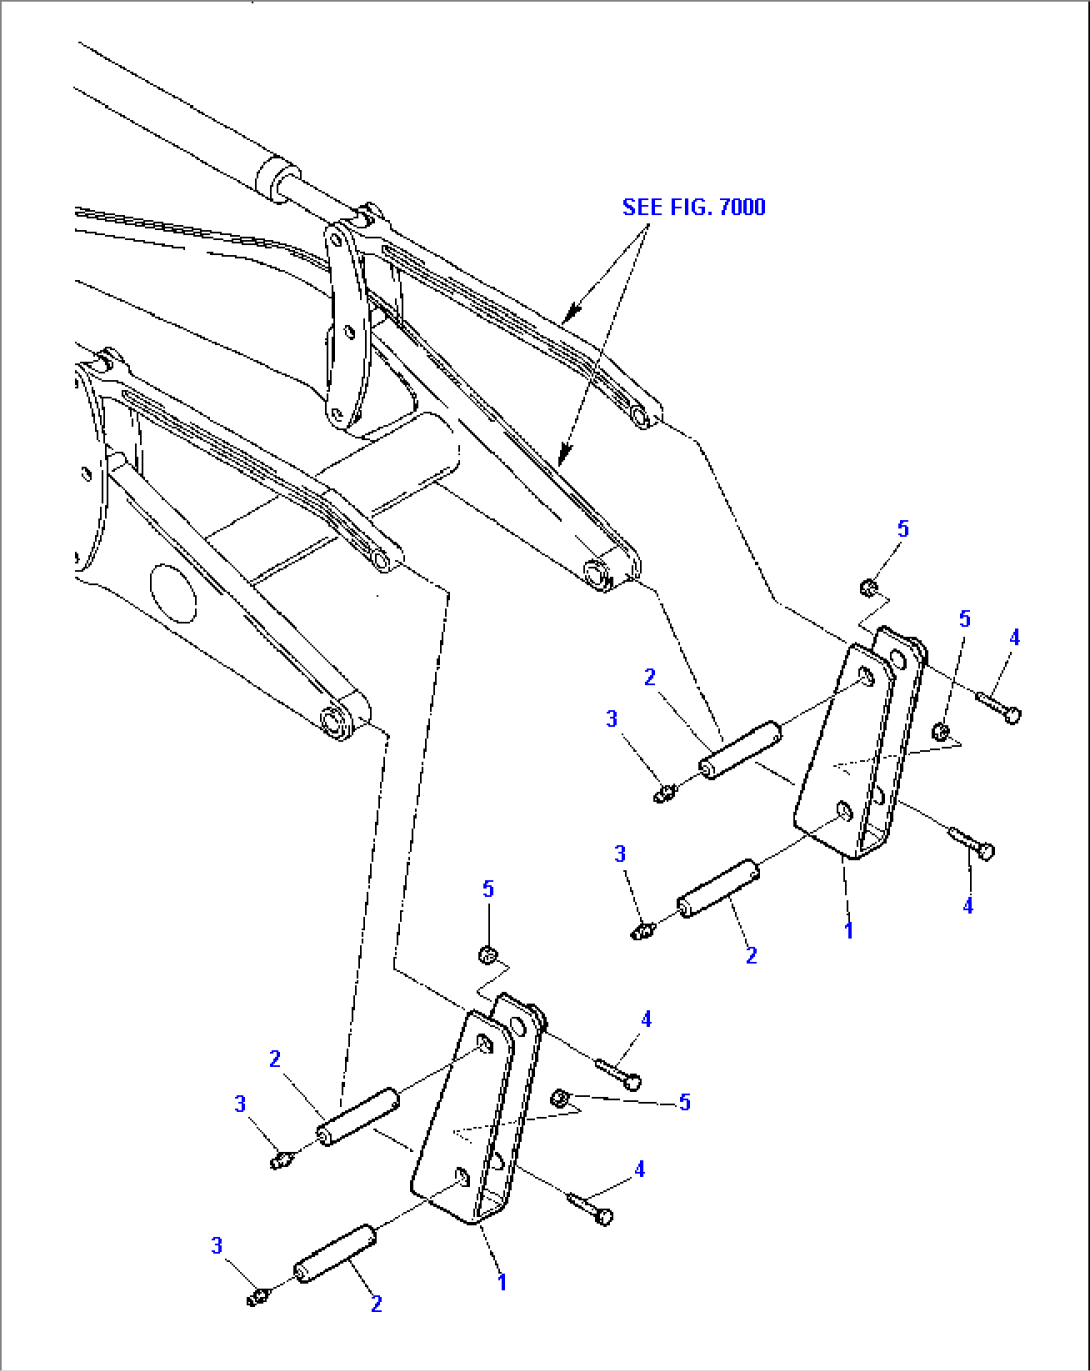 SAFETY STAY FOR LOADER ARM END